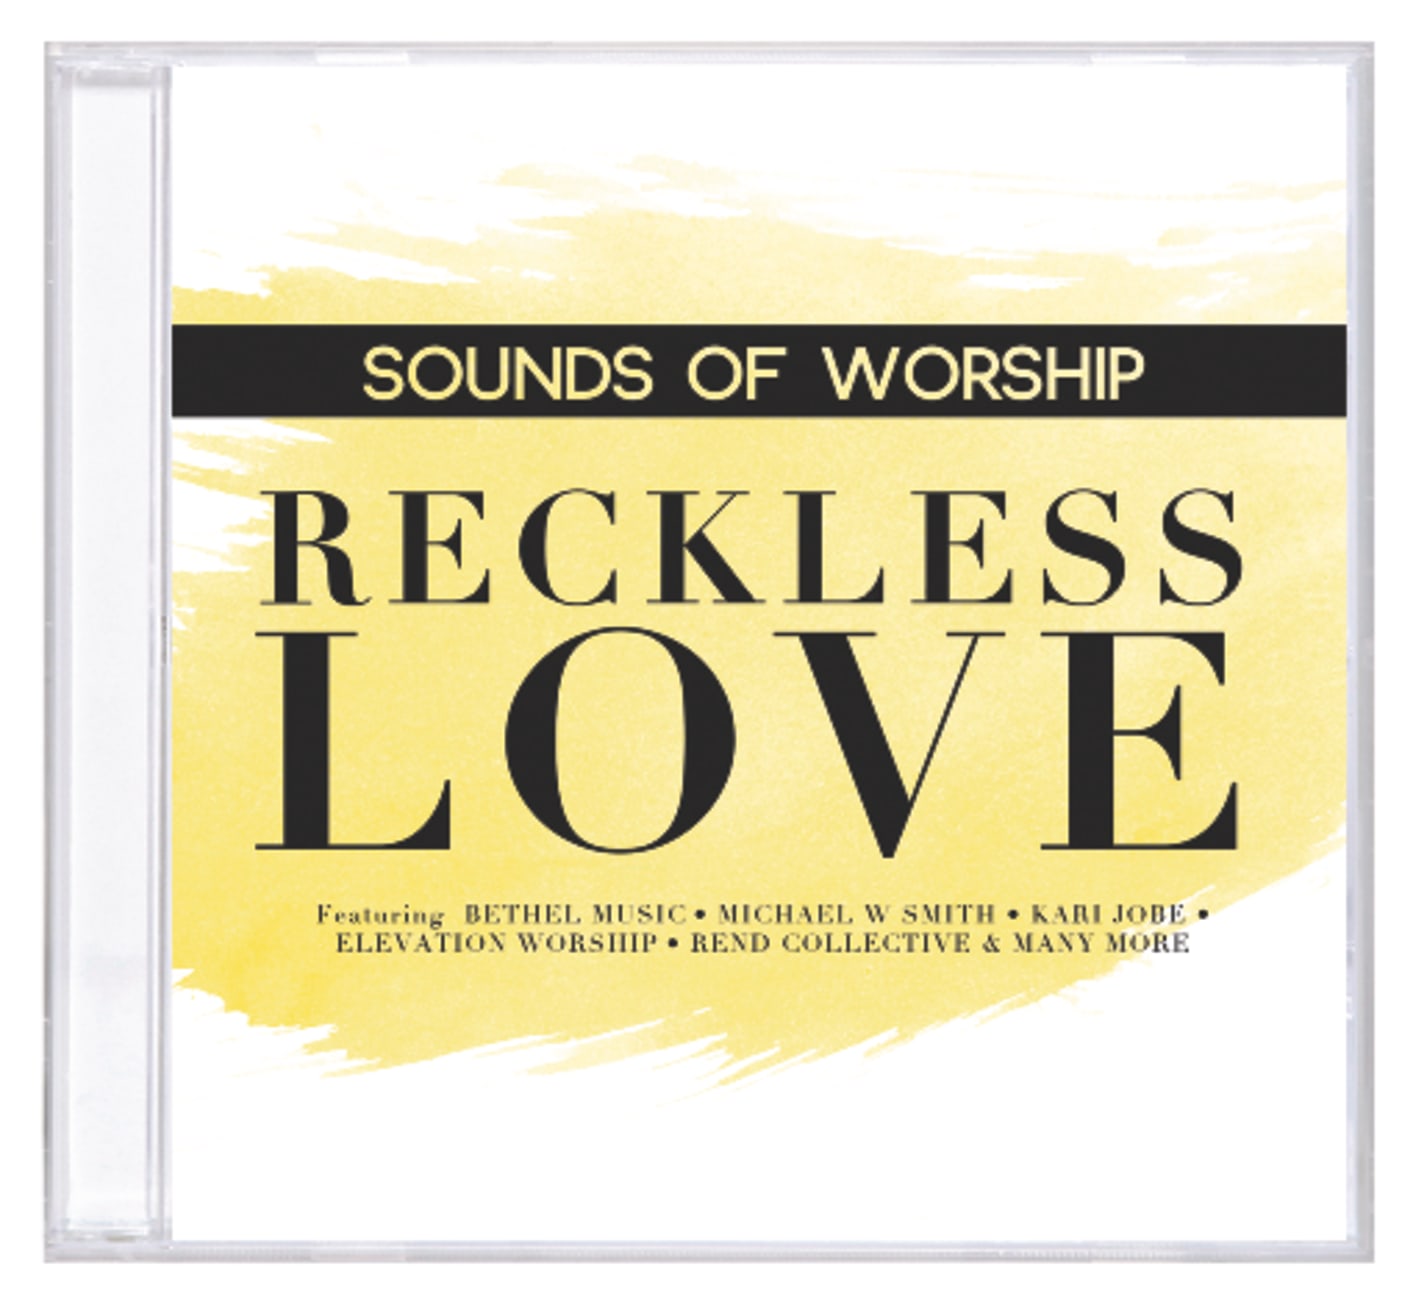 Sounds of Worship: Reckless Love (Double Cd) CD